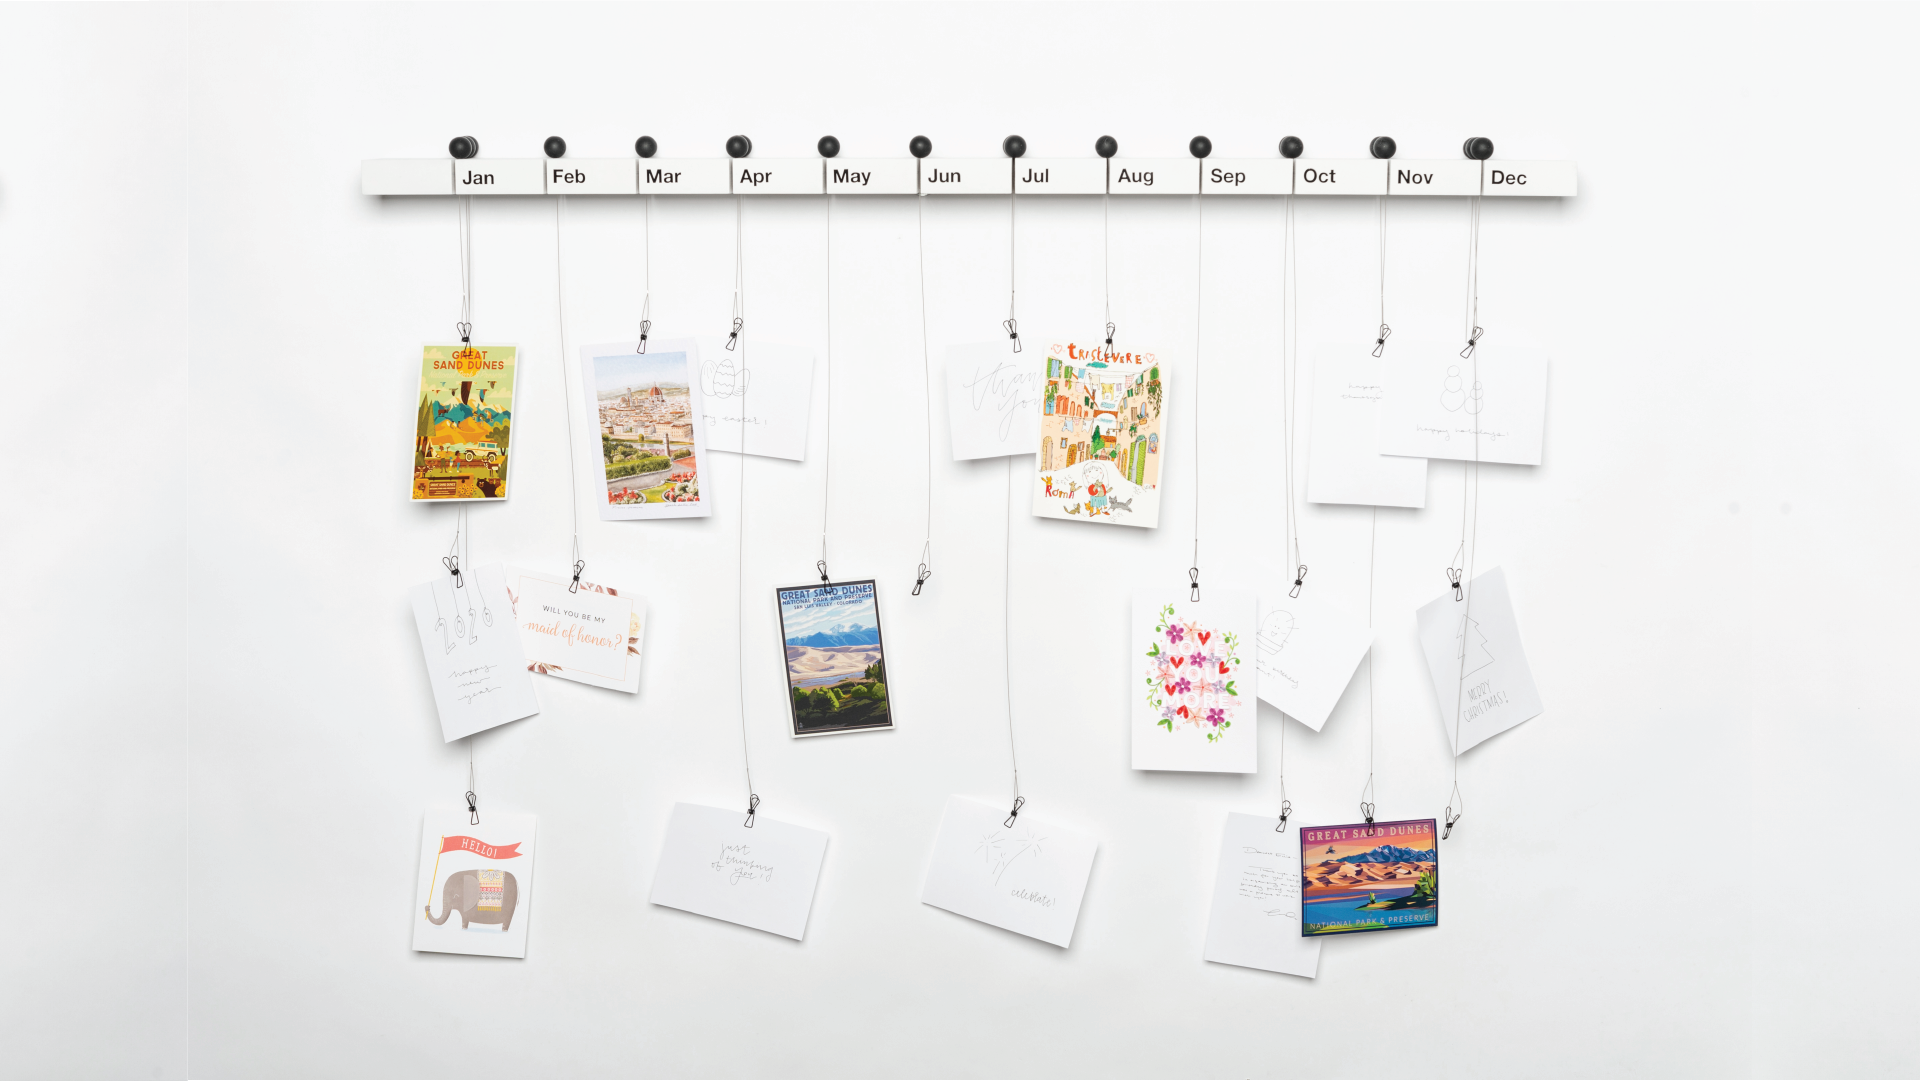 White shelf with vertical slots for each month of the year. Each slot has its own holder - a ball shape handle with a string attached to it. Photos and postcards are hanged through the black holders.